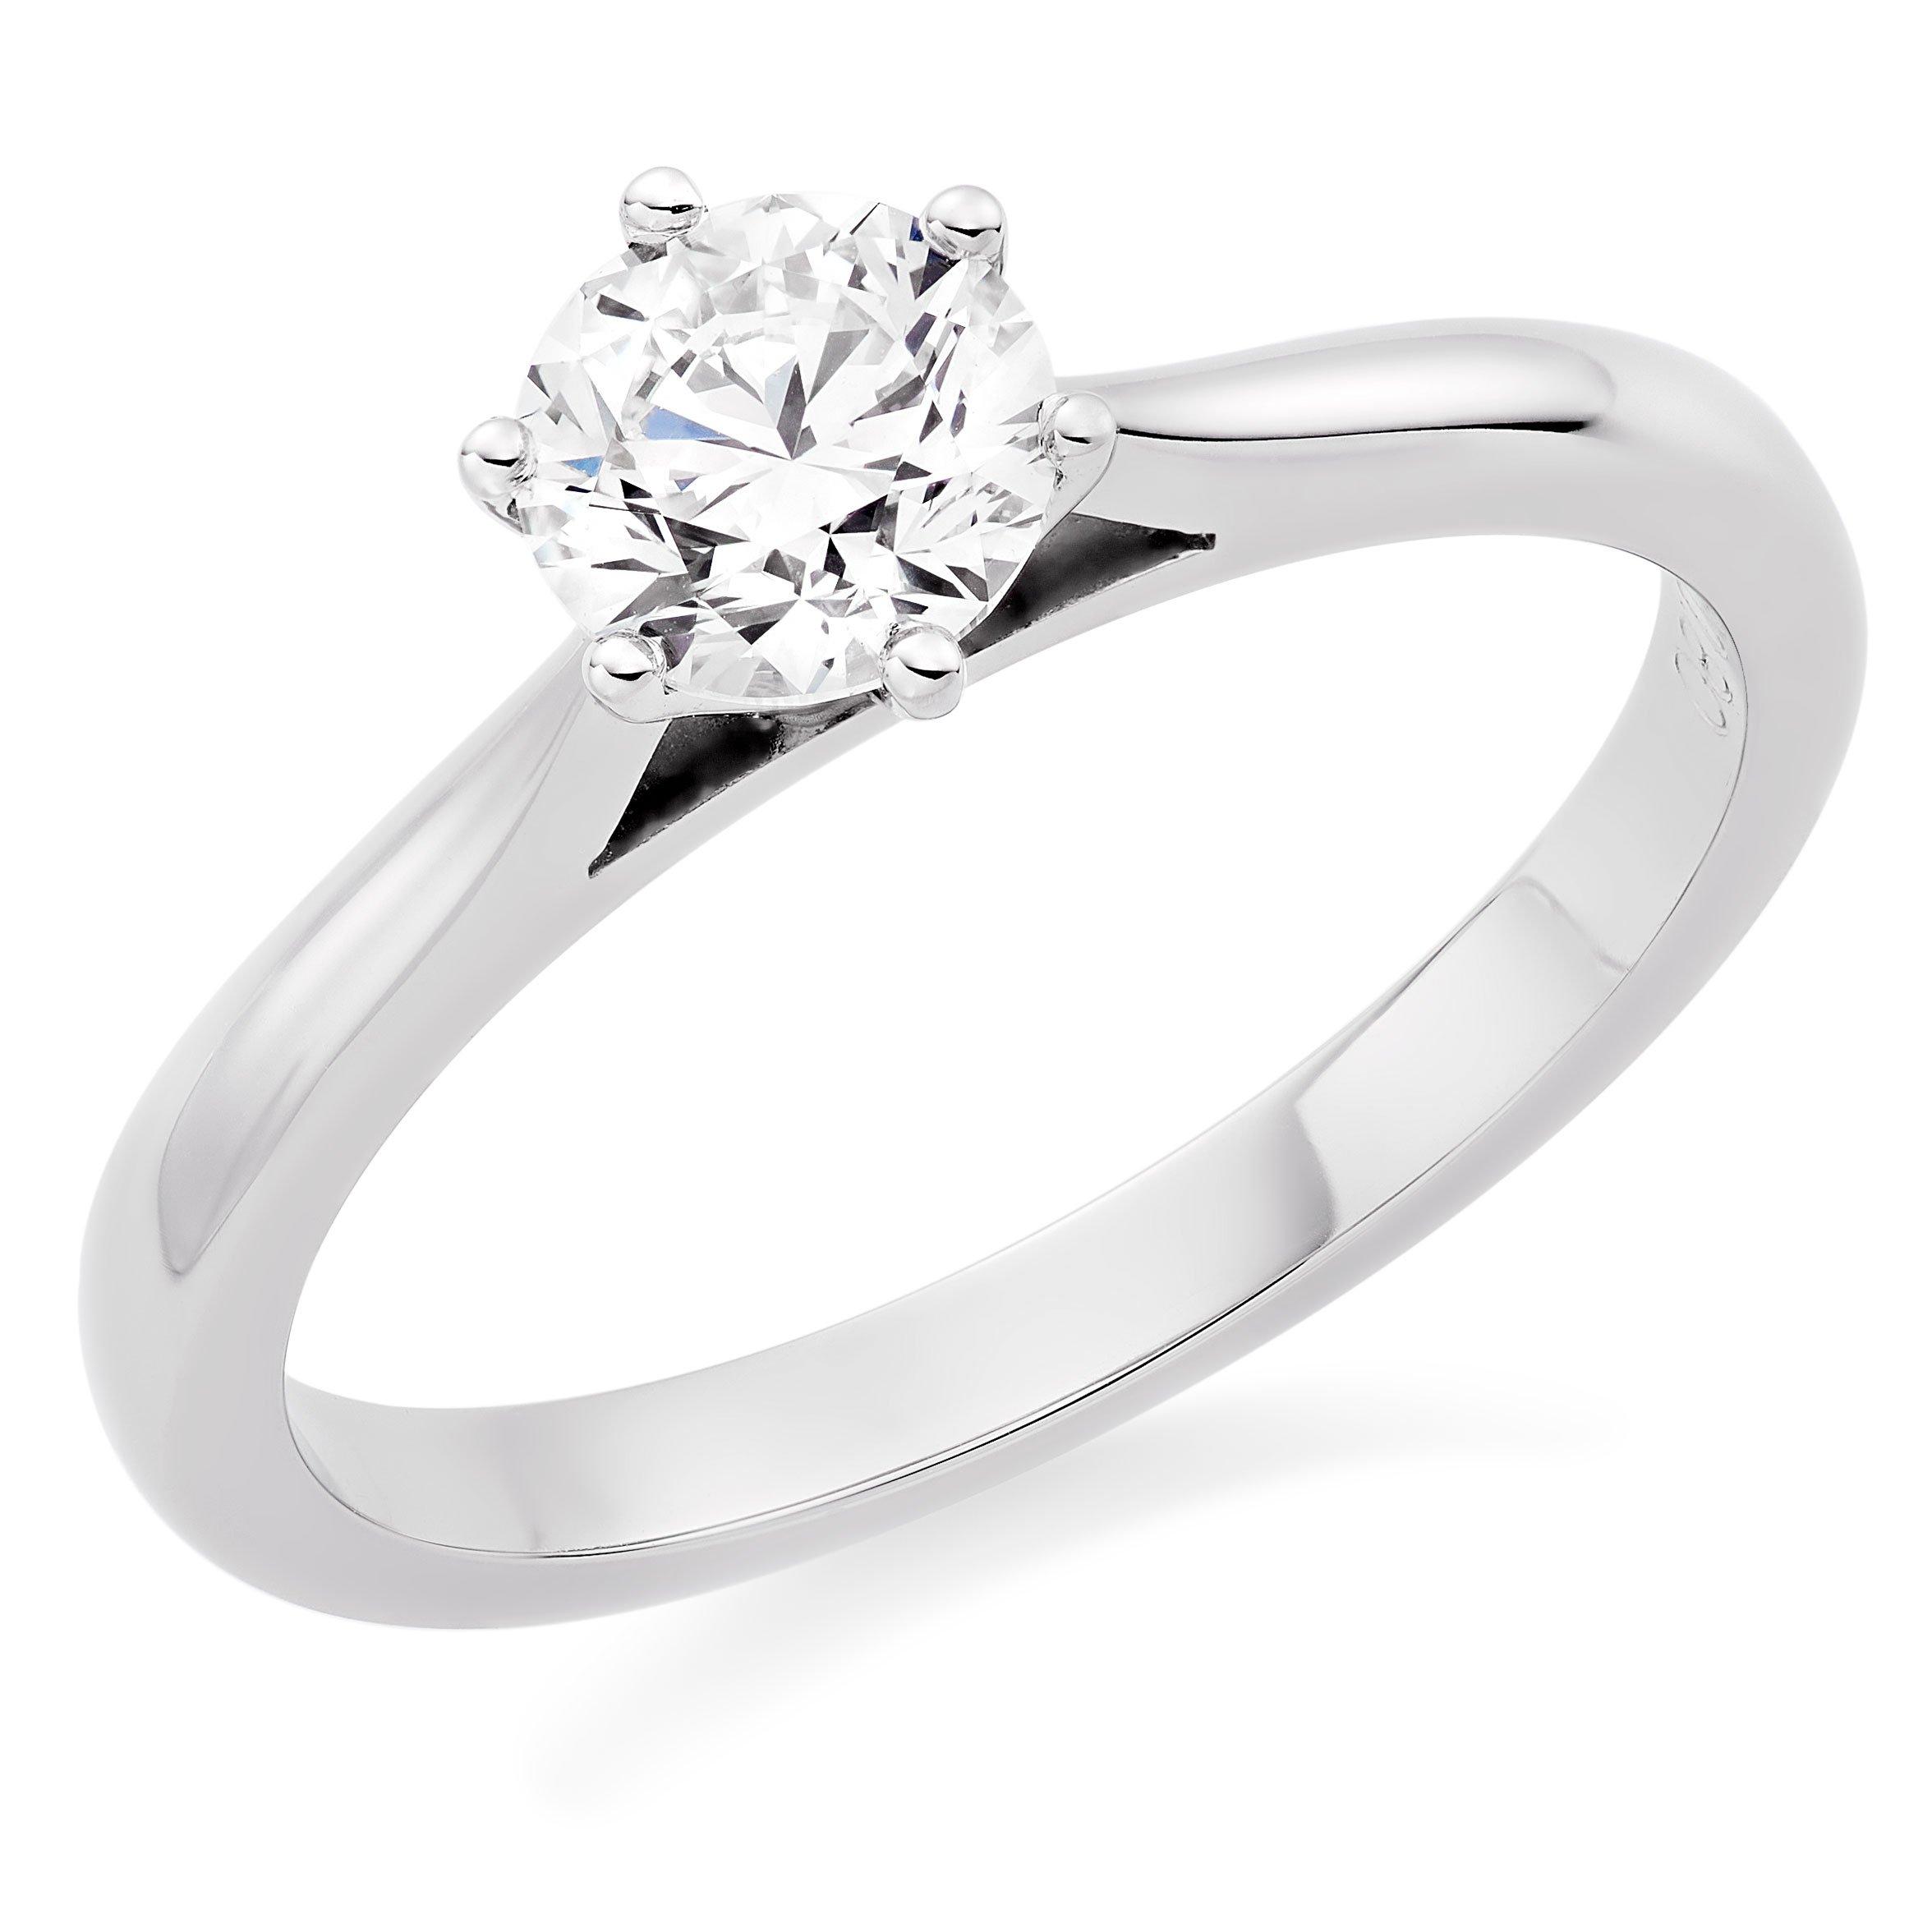 Once Platinum Diamond Solitaire Ring | 0137586 | Beaverbrooks the Jewellers